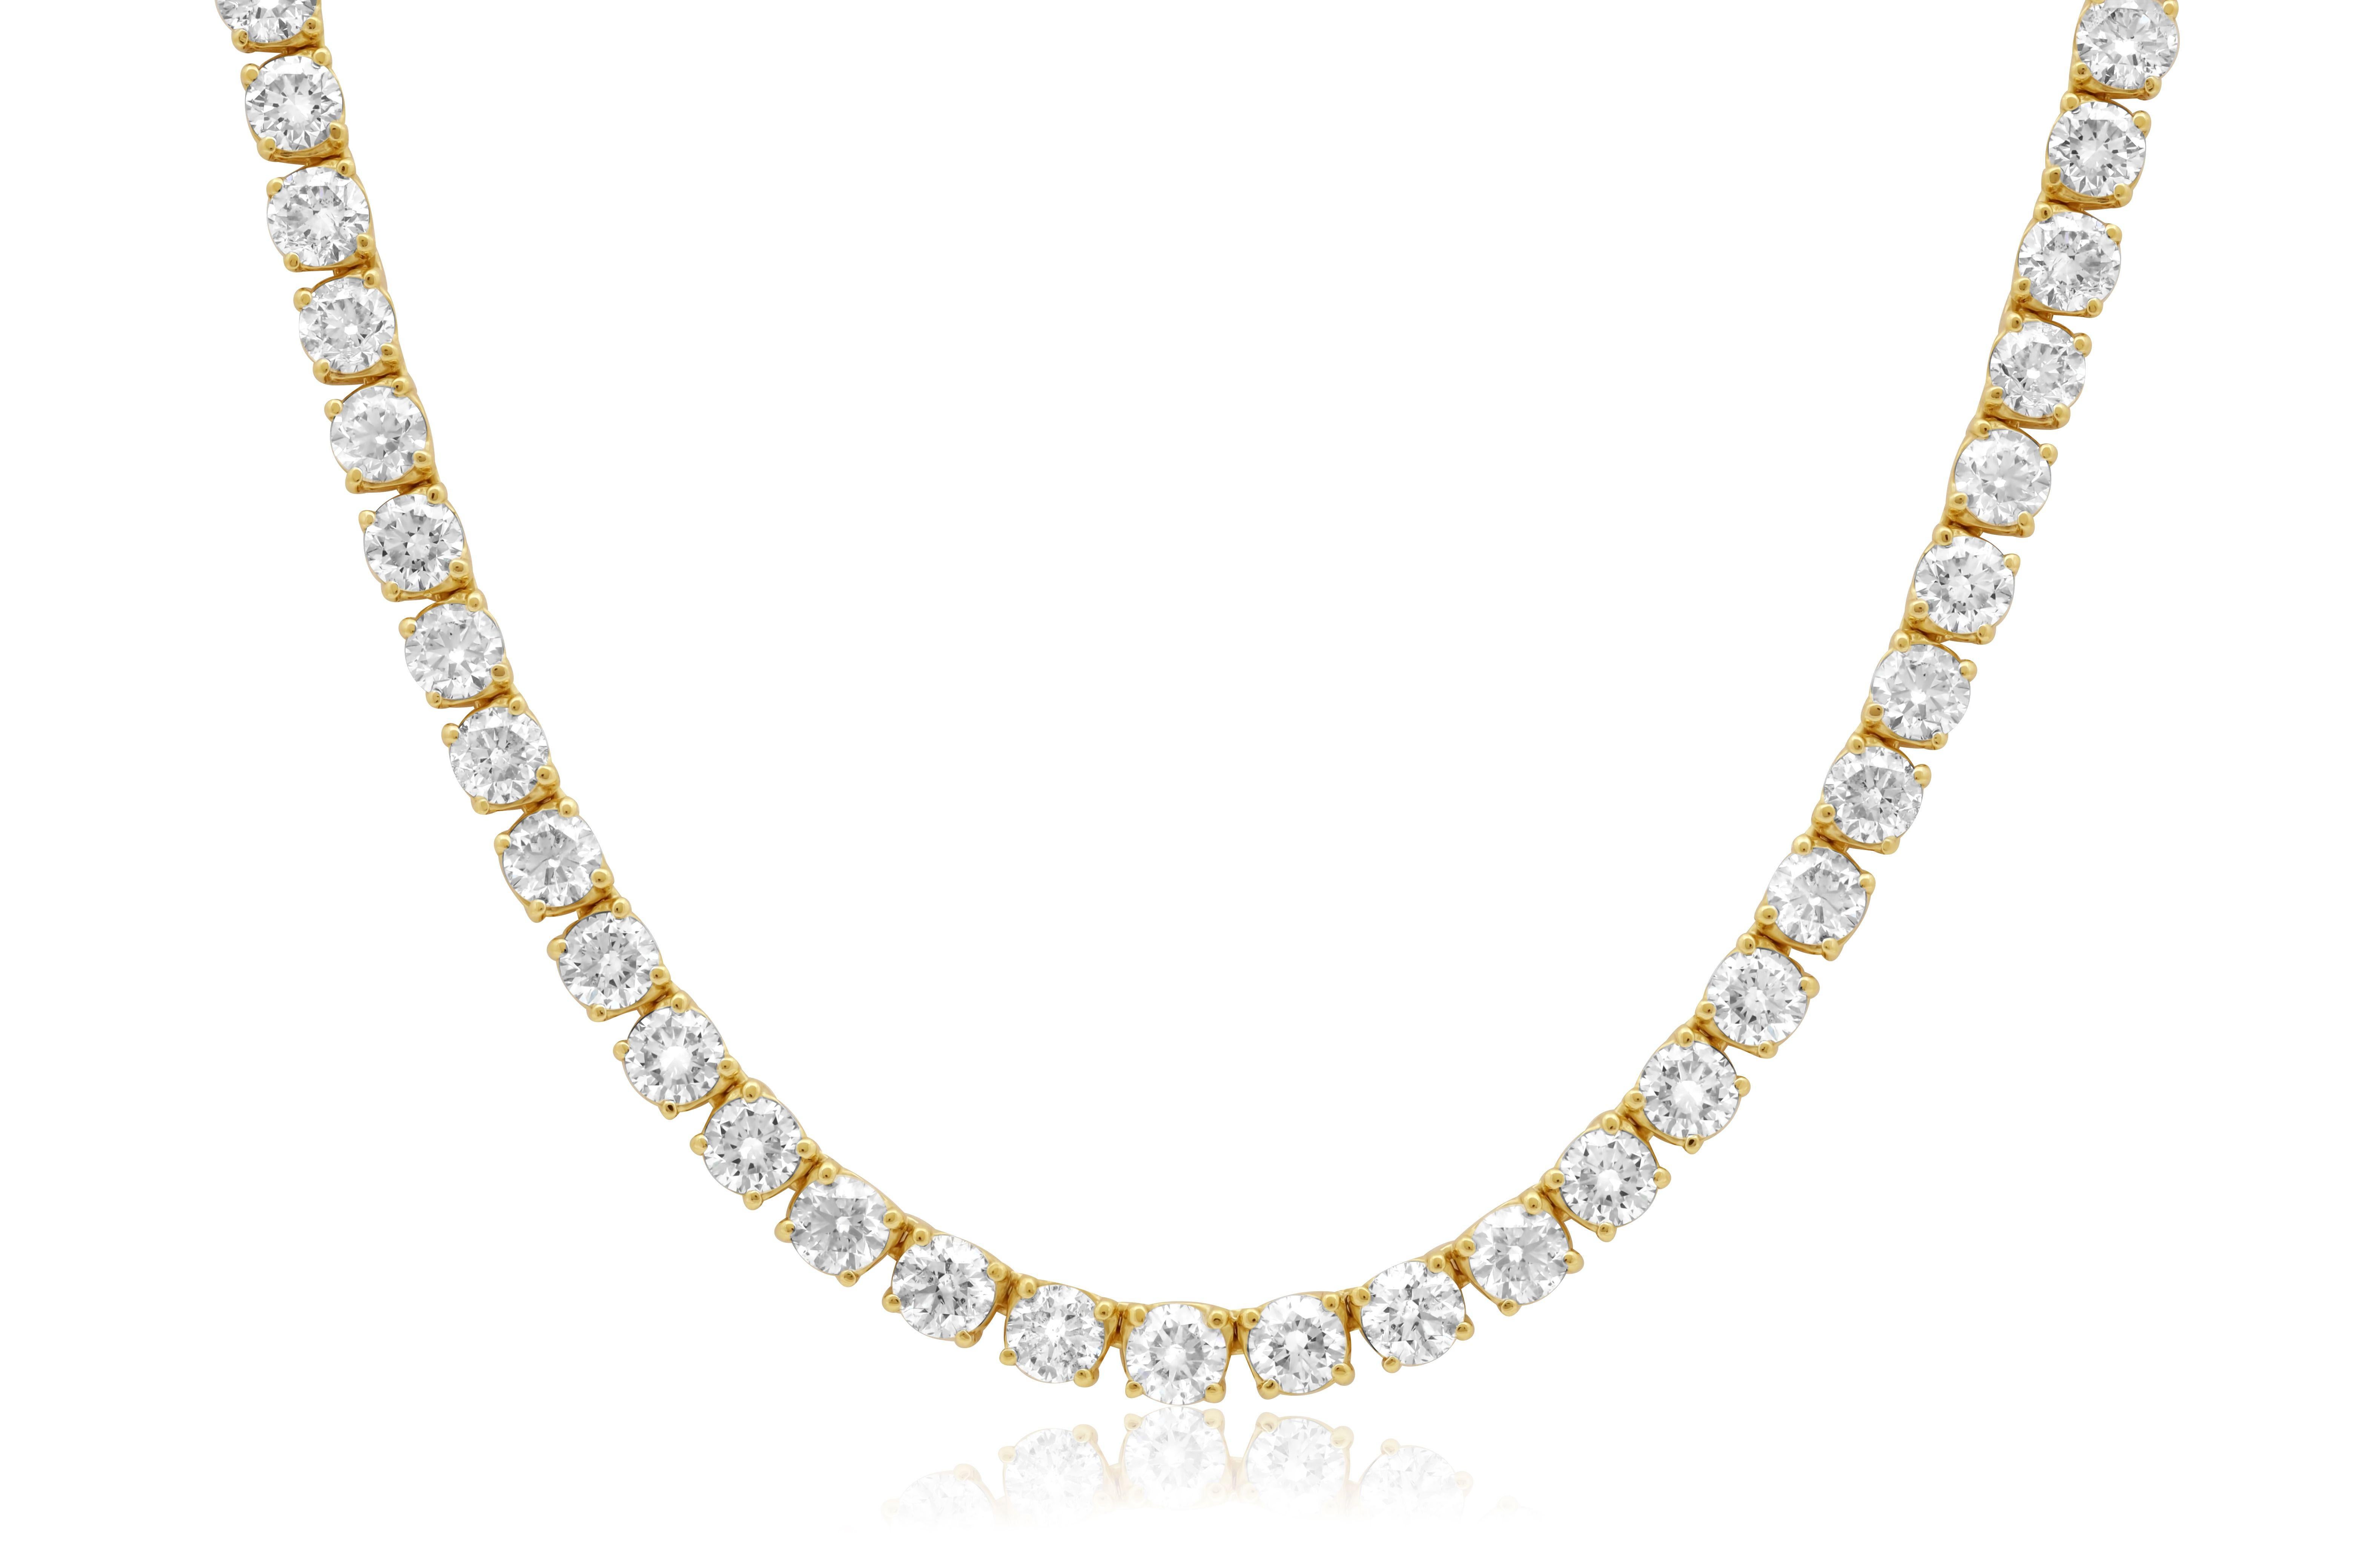 Diana M. 28.70 Carat Diamond Tennis Necklace In New Condition For Sale In New York, NY